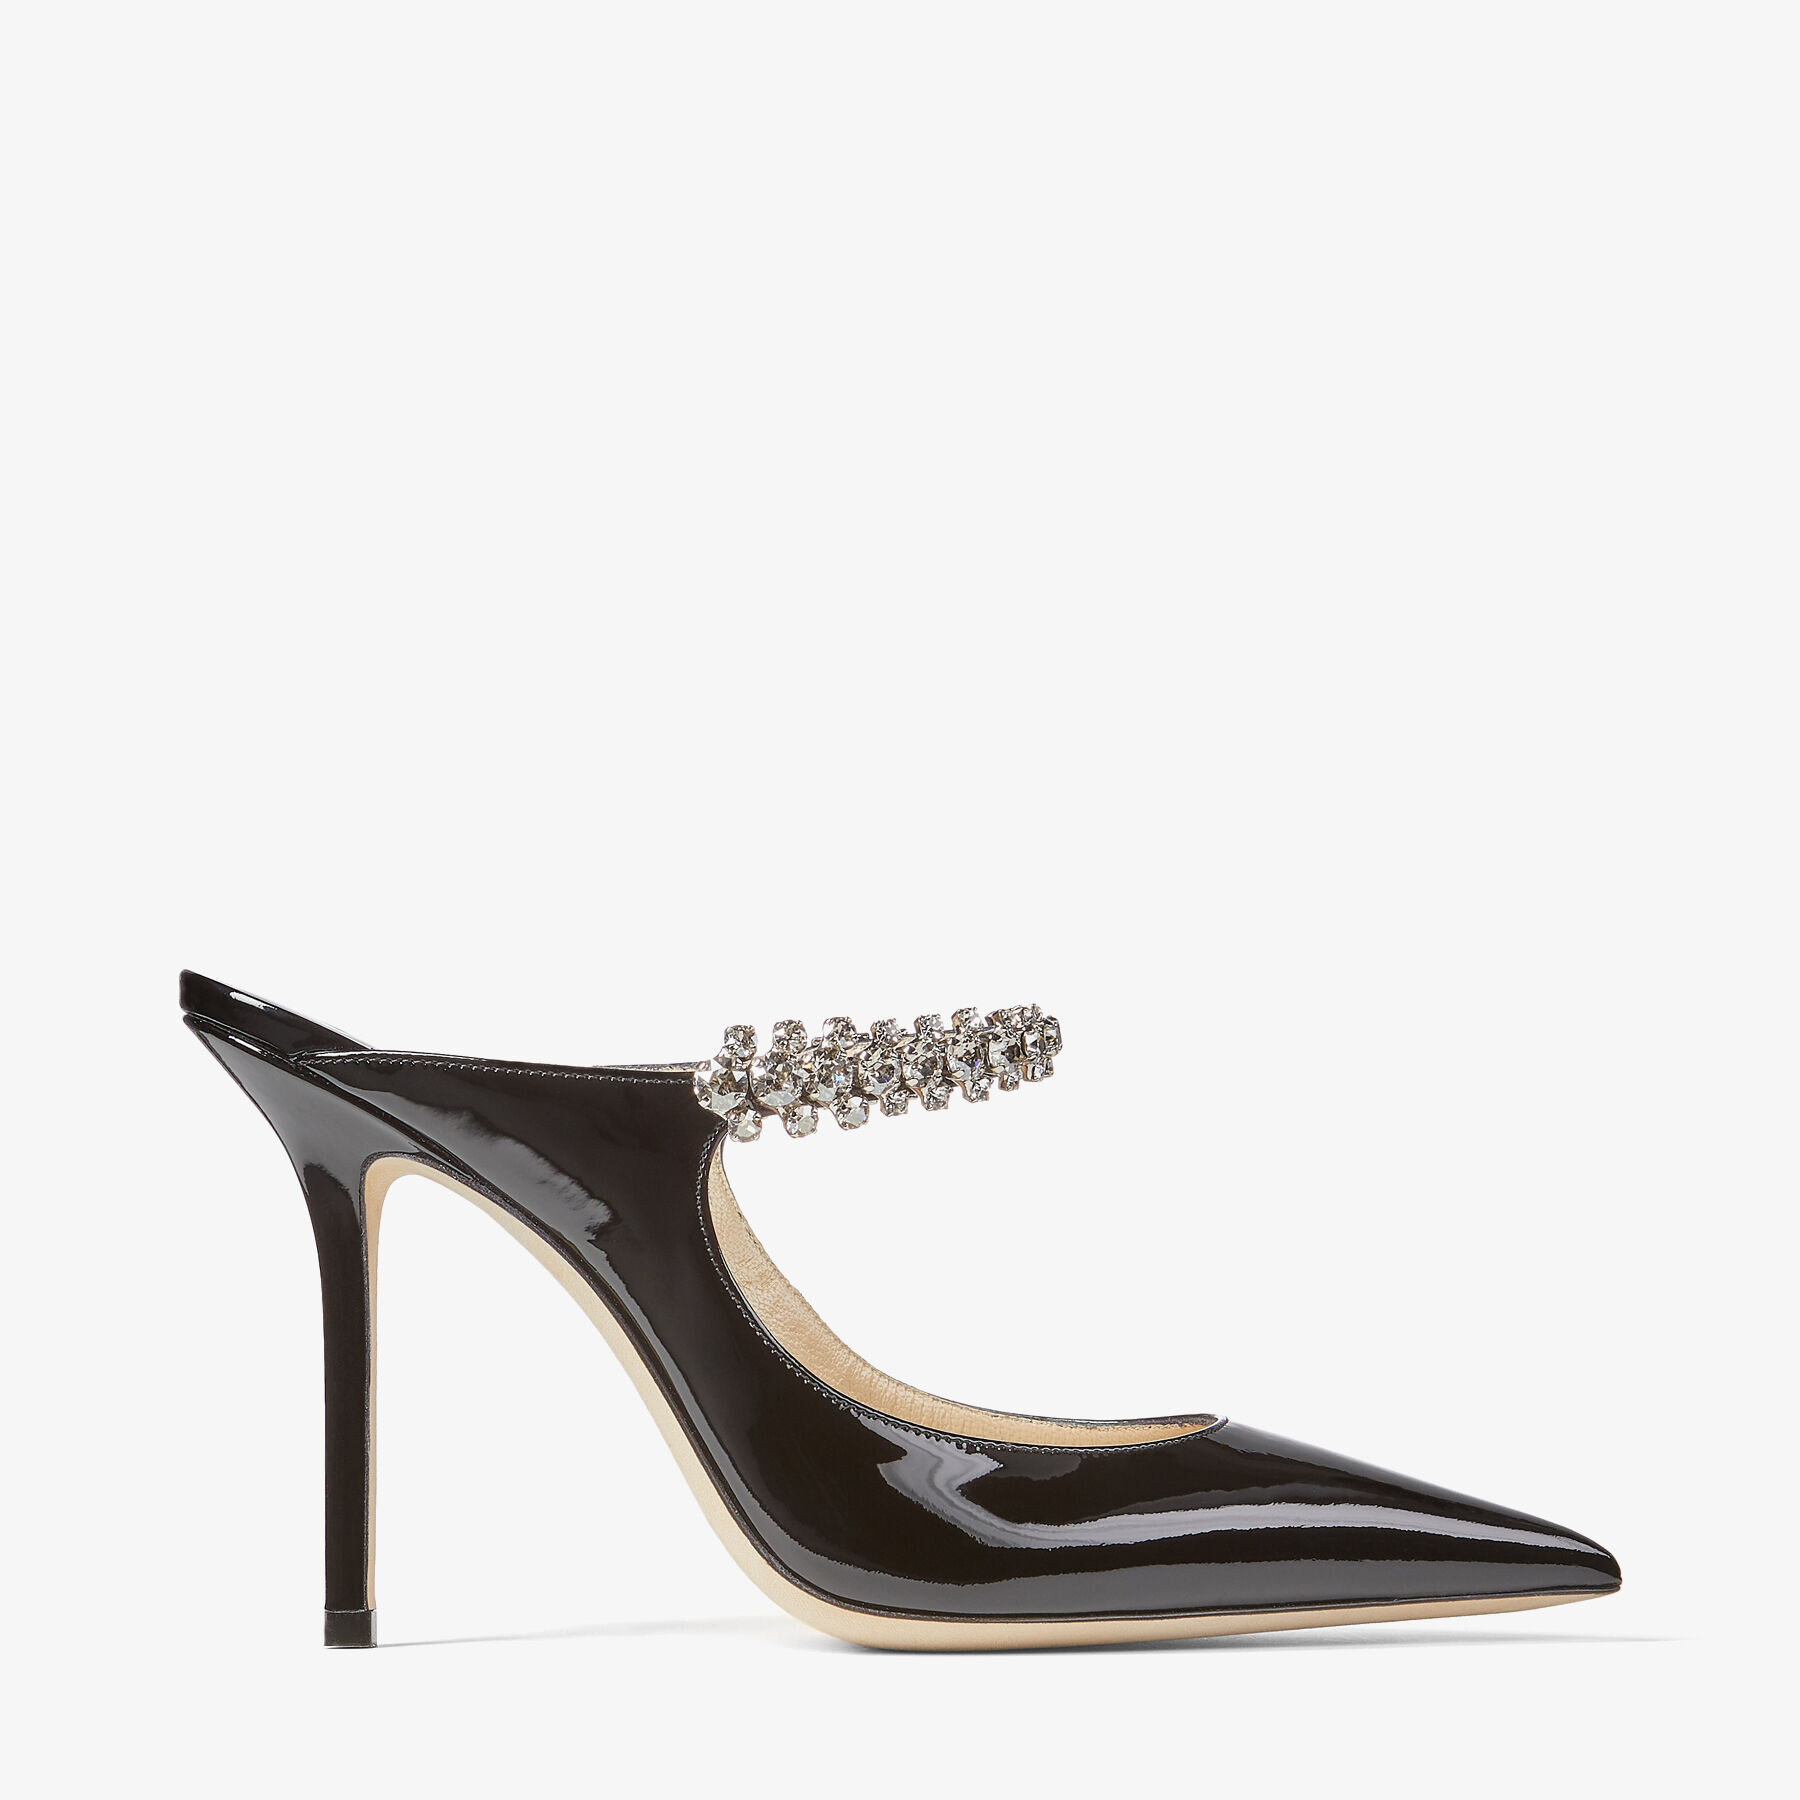 Bing 100, Black Patent Leather Mules with Crystal Strap